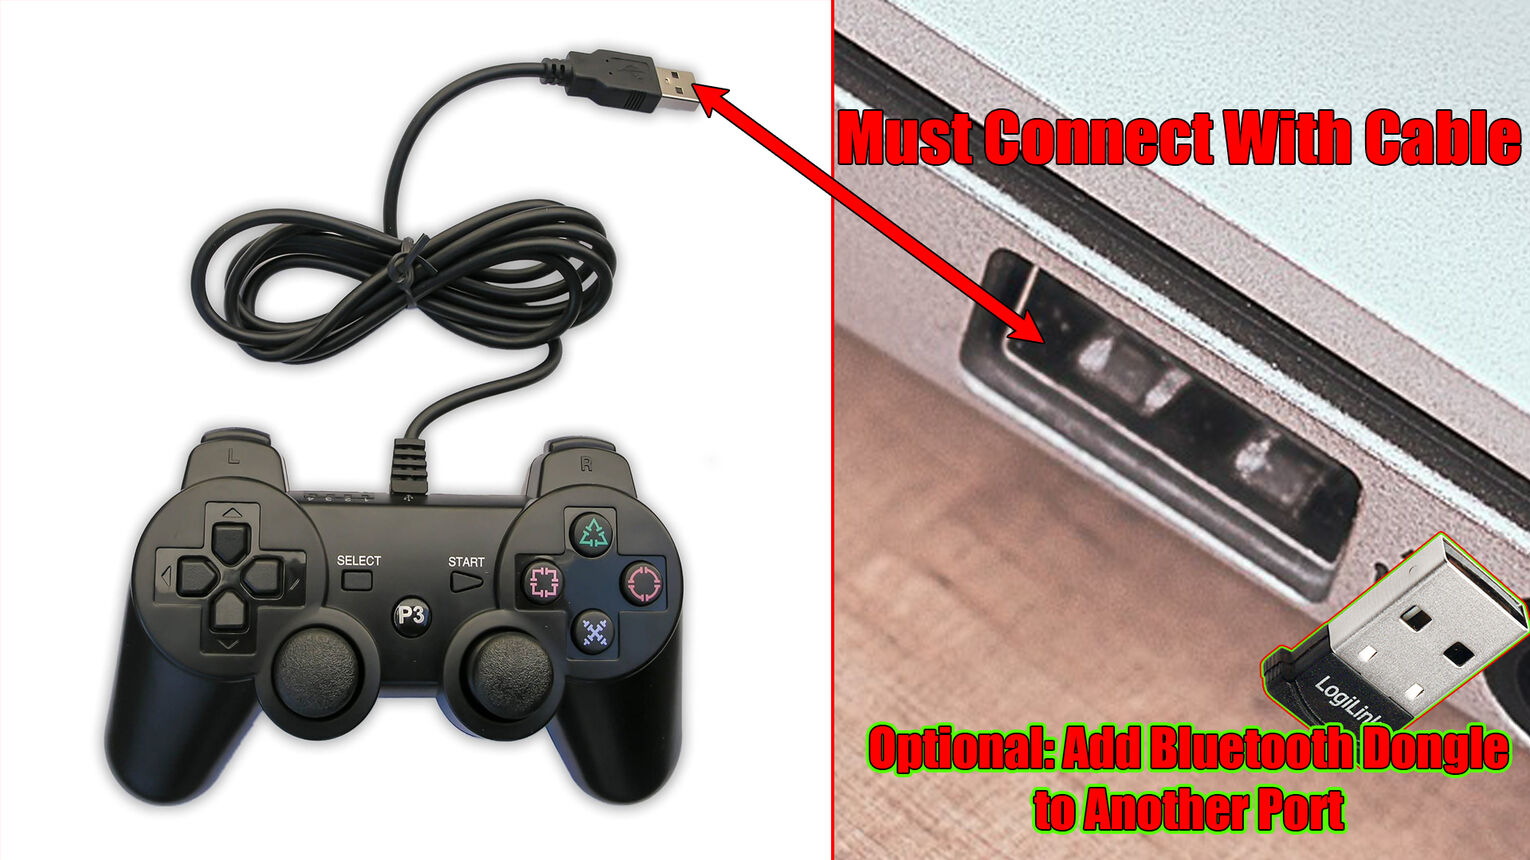 PS3 Controller and Bluetooth Dongle Connect to PC